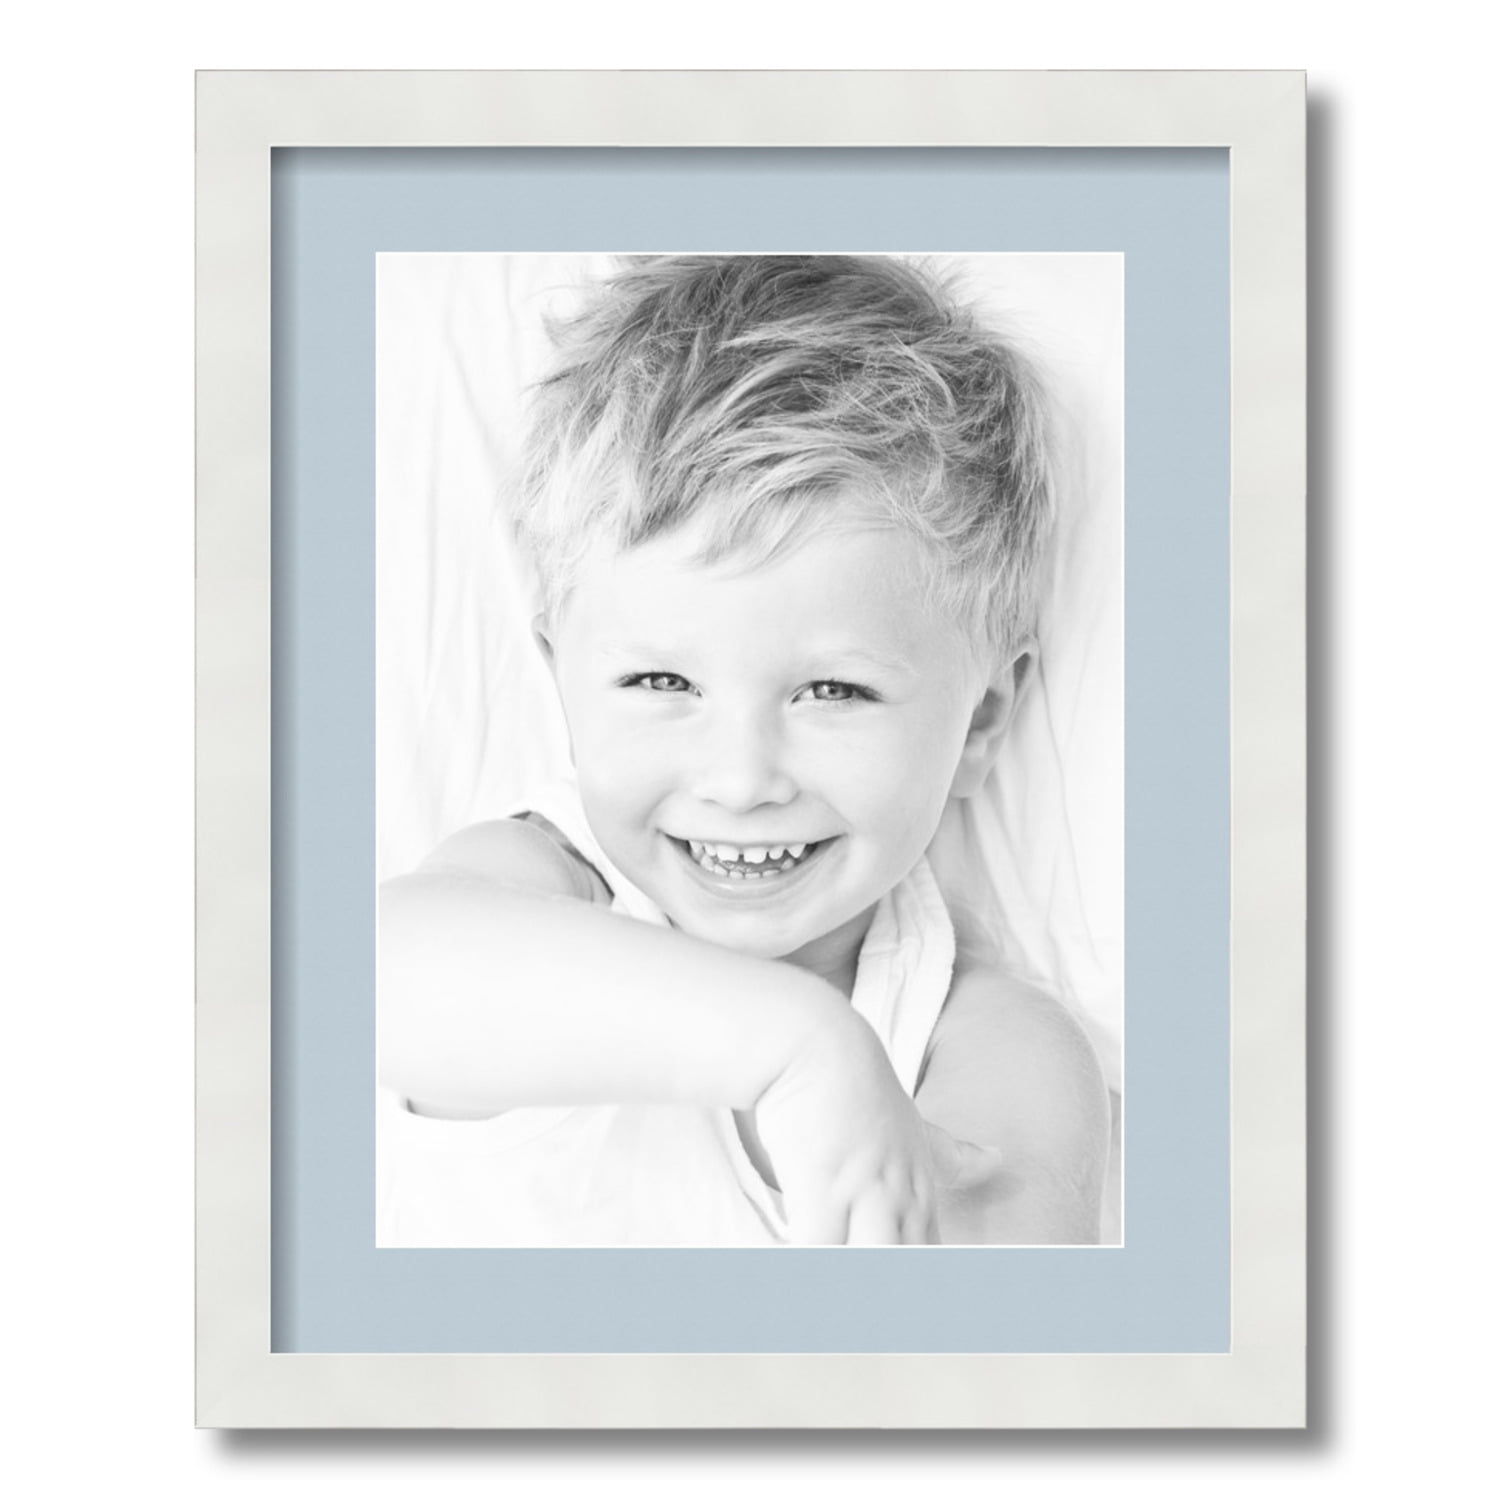 16x20 Black MDF Frame For 11x14 Picture with Ivory Mat and Real Glass